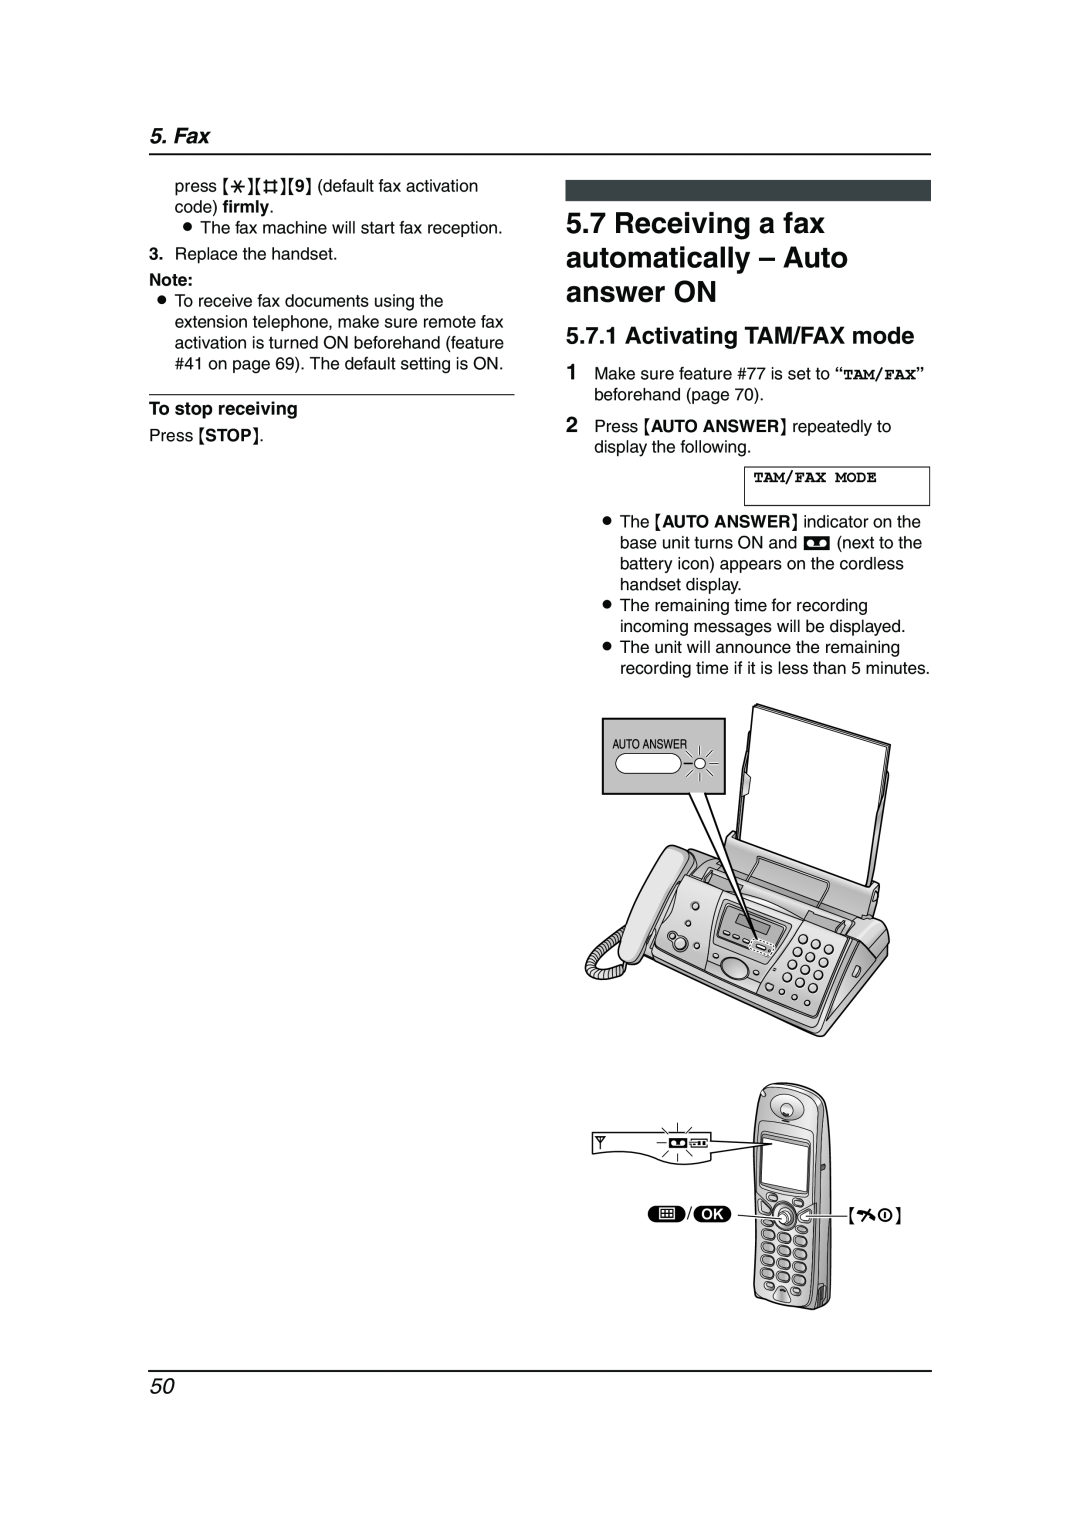 Panasonic KX-FC241AL manual Receiving a fax automatically - Auto answer ON, Activating TAM/FAX mode, To stop receiving, Fax 